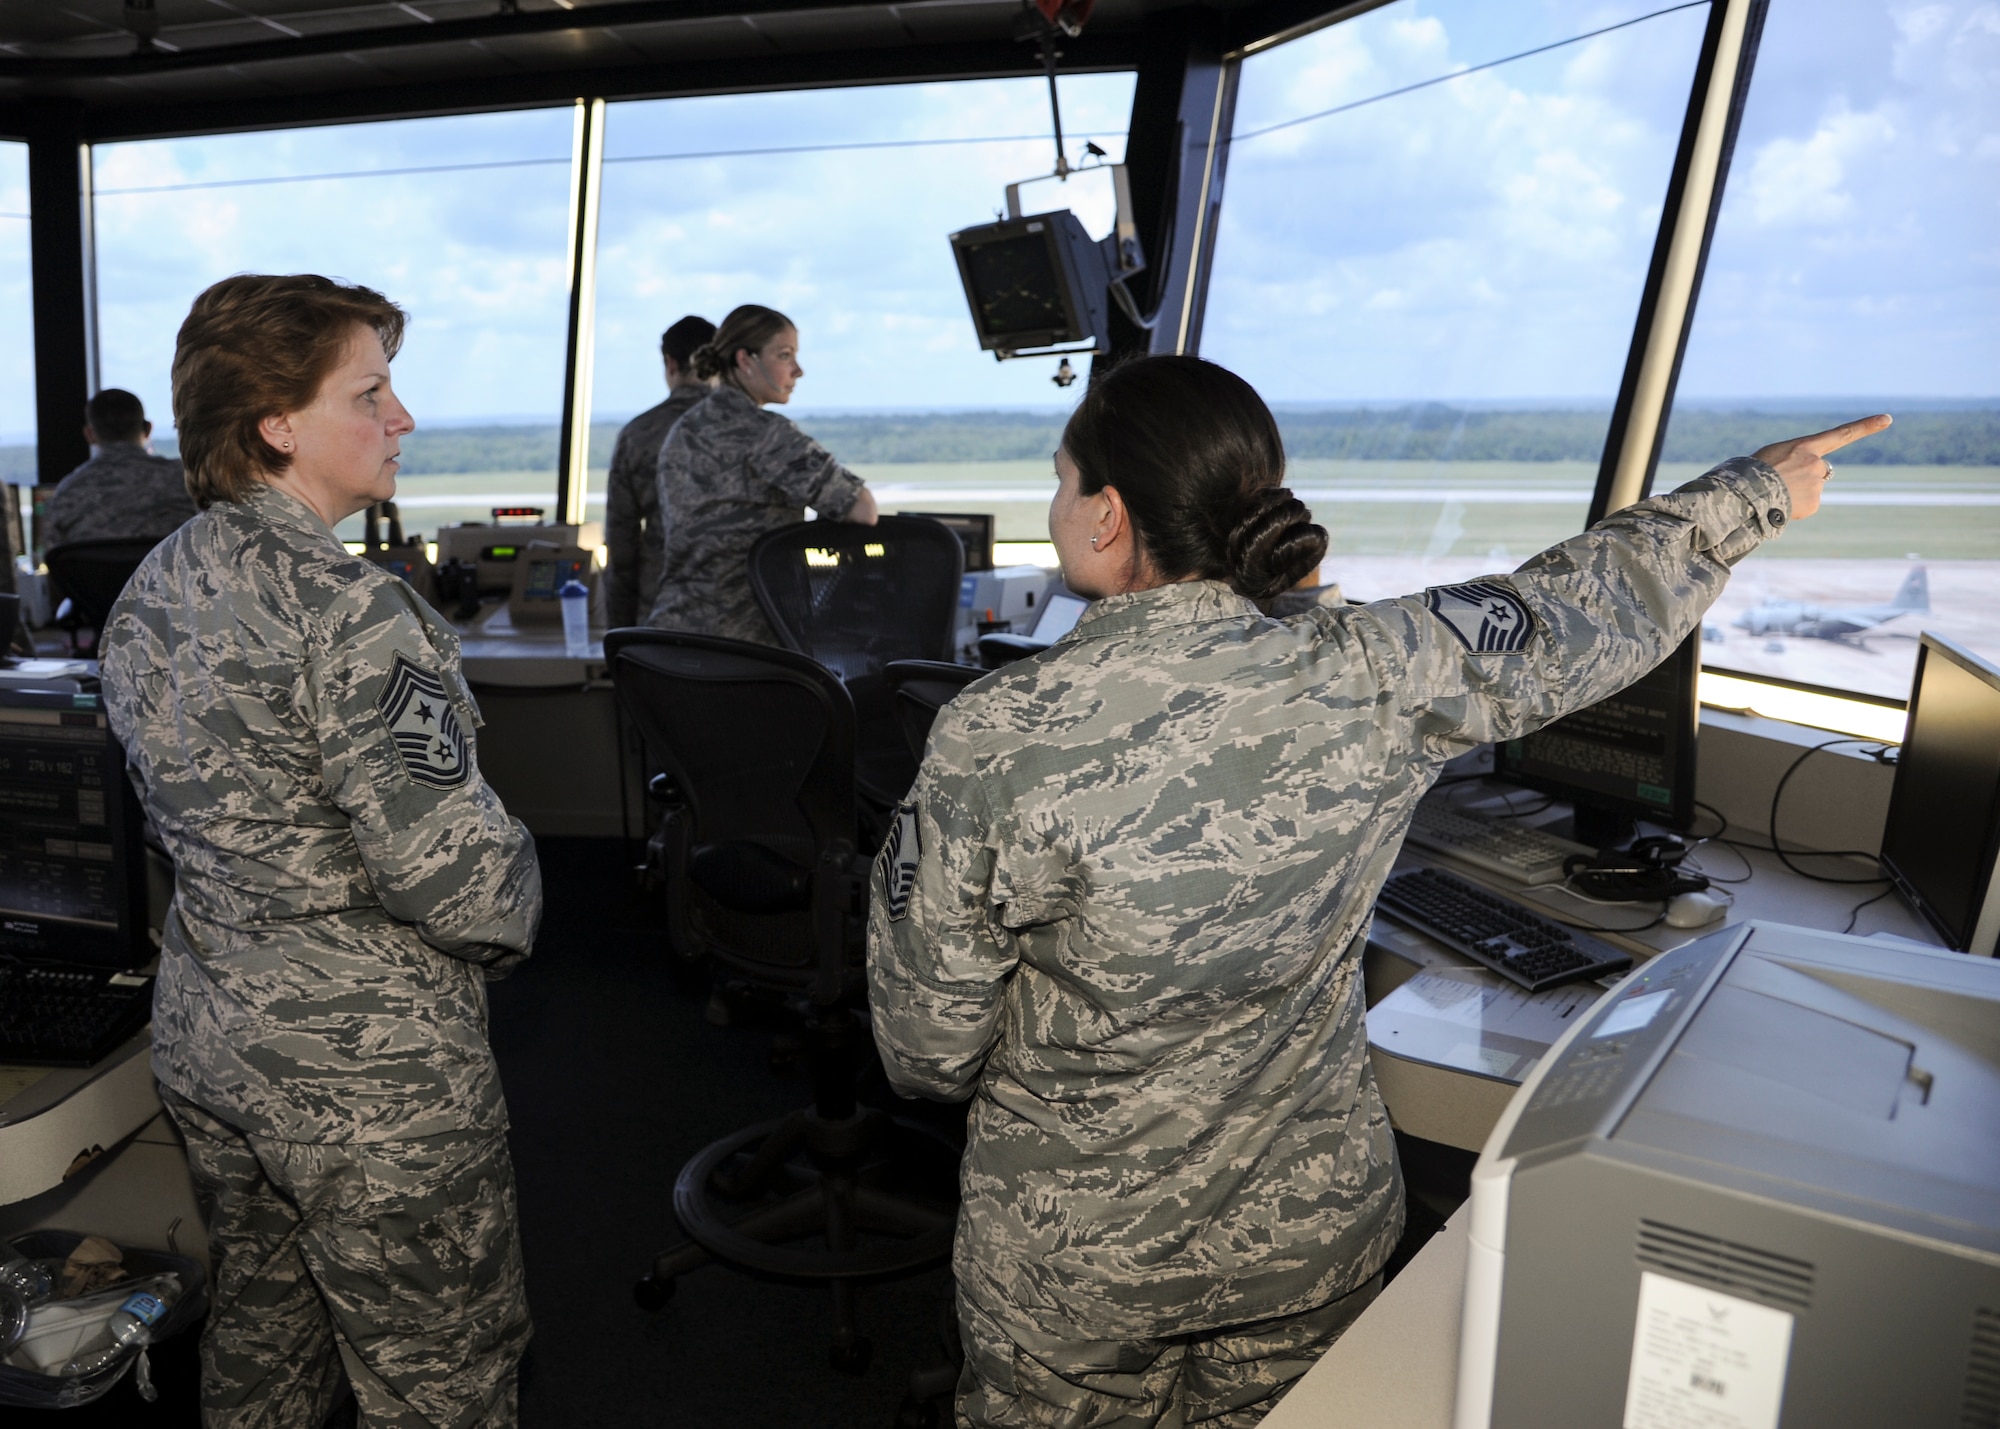 Chief Master Sgt. Rhonda Buening, 19th Airlift Wing command chief, is briefed on air traffic control operations by Master Sgt. Kristi Lott, 19th Operations Support Squadron chief controller, June 3, 2014, at Little Rock Air Force Base, Ark.  Buening frequently visits various units across the base to connect with Airmen.  (U.S. Air Force photo by Airman 1st Class Harry Brexel)